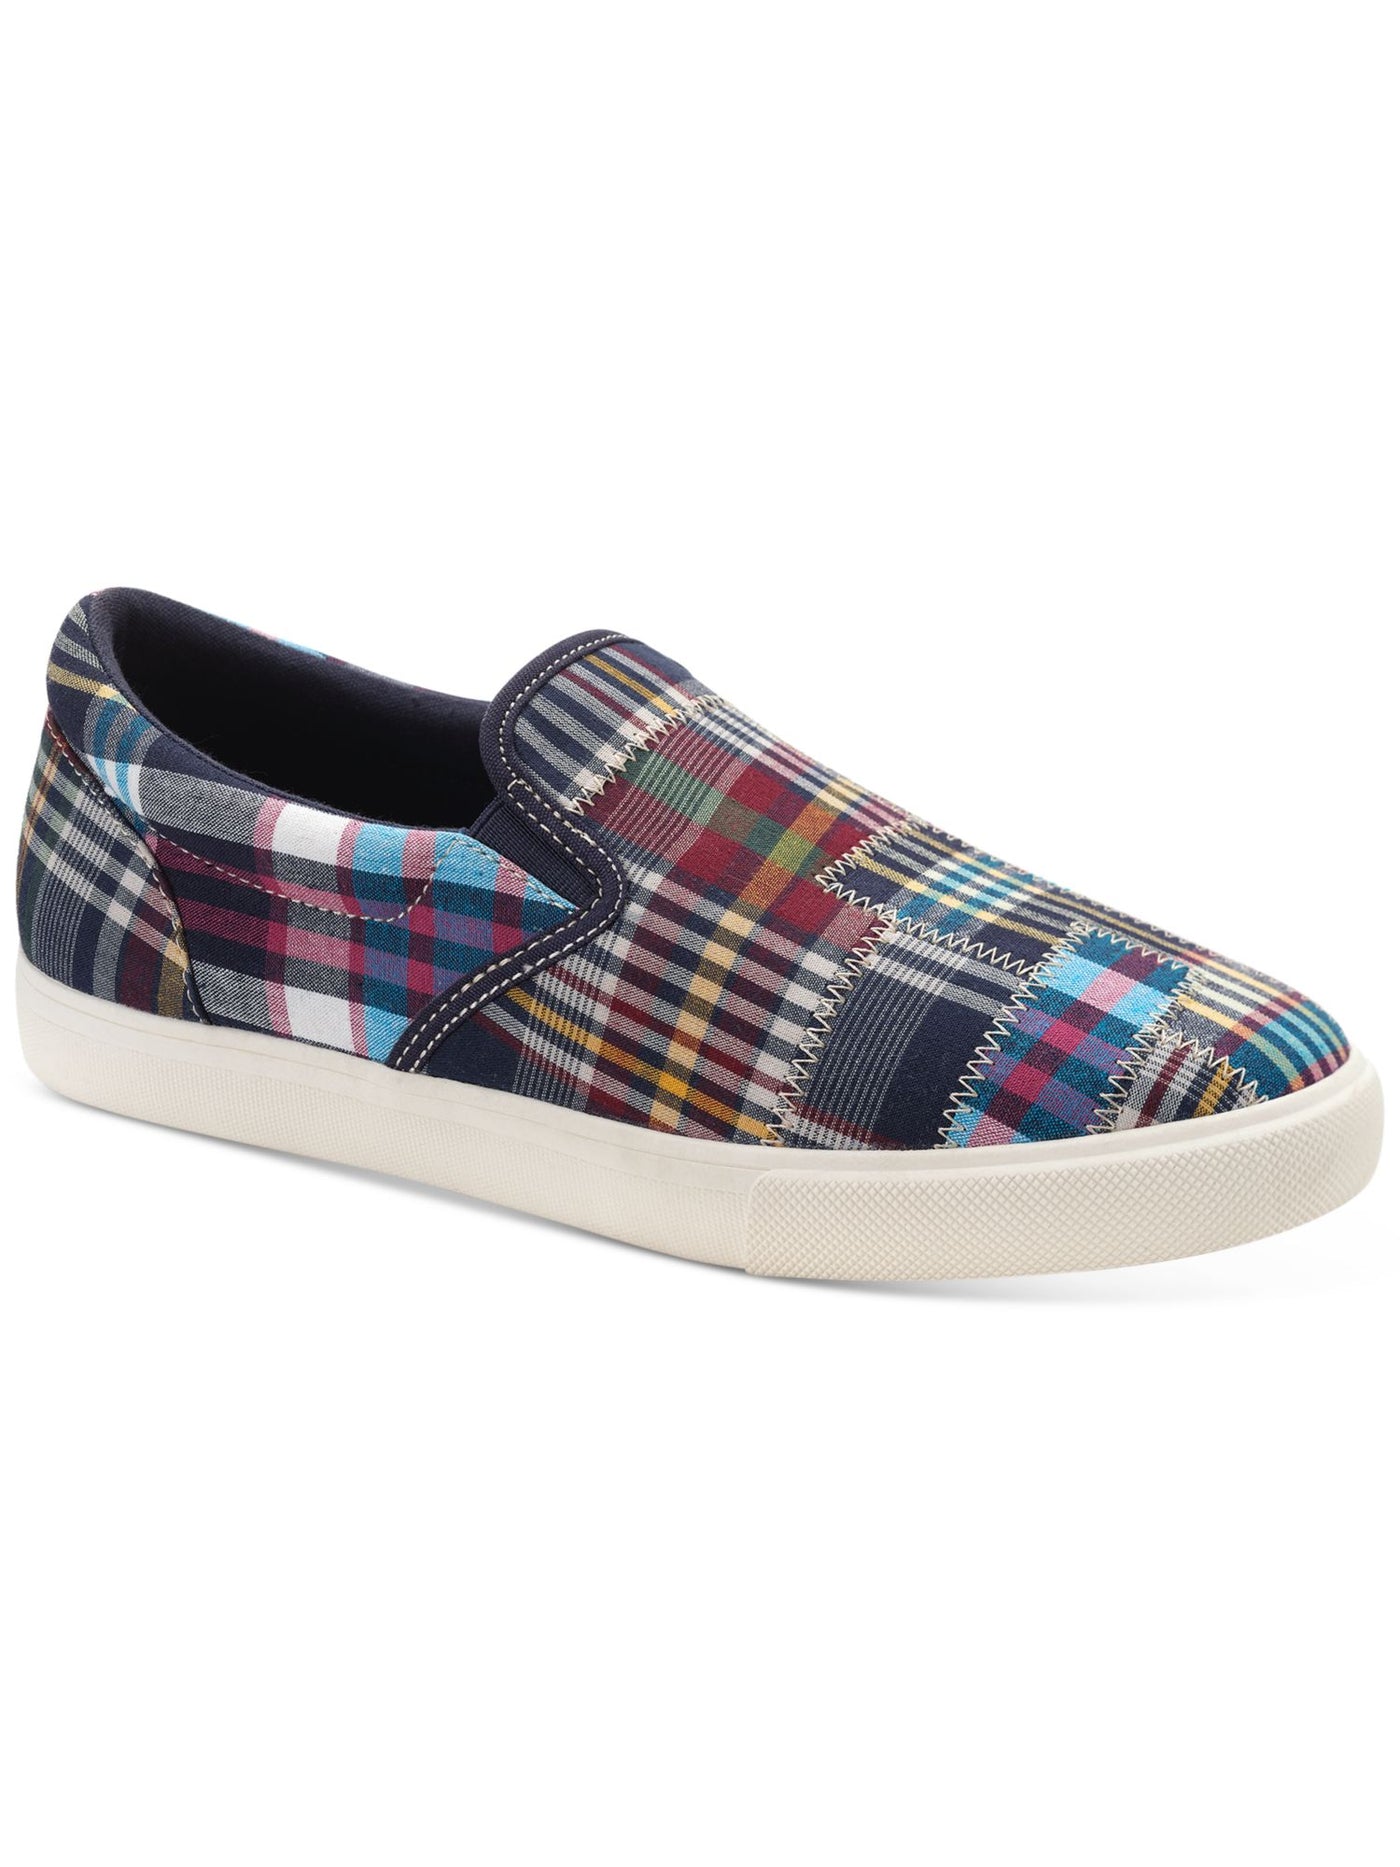 CLUBROOM Mens Blue Plaid Padded Goring Tate Round Toe Platform Slip On Sneakers Shoes 10